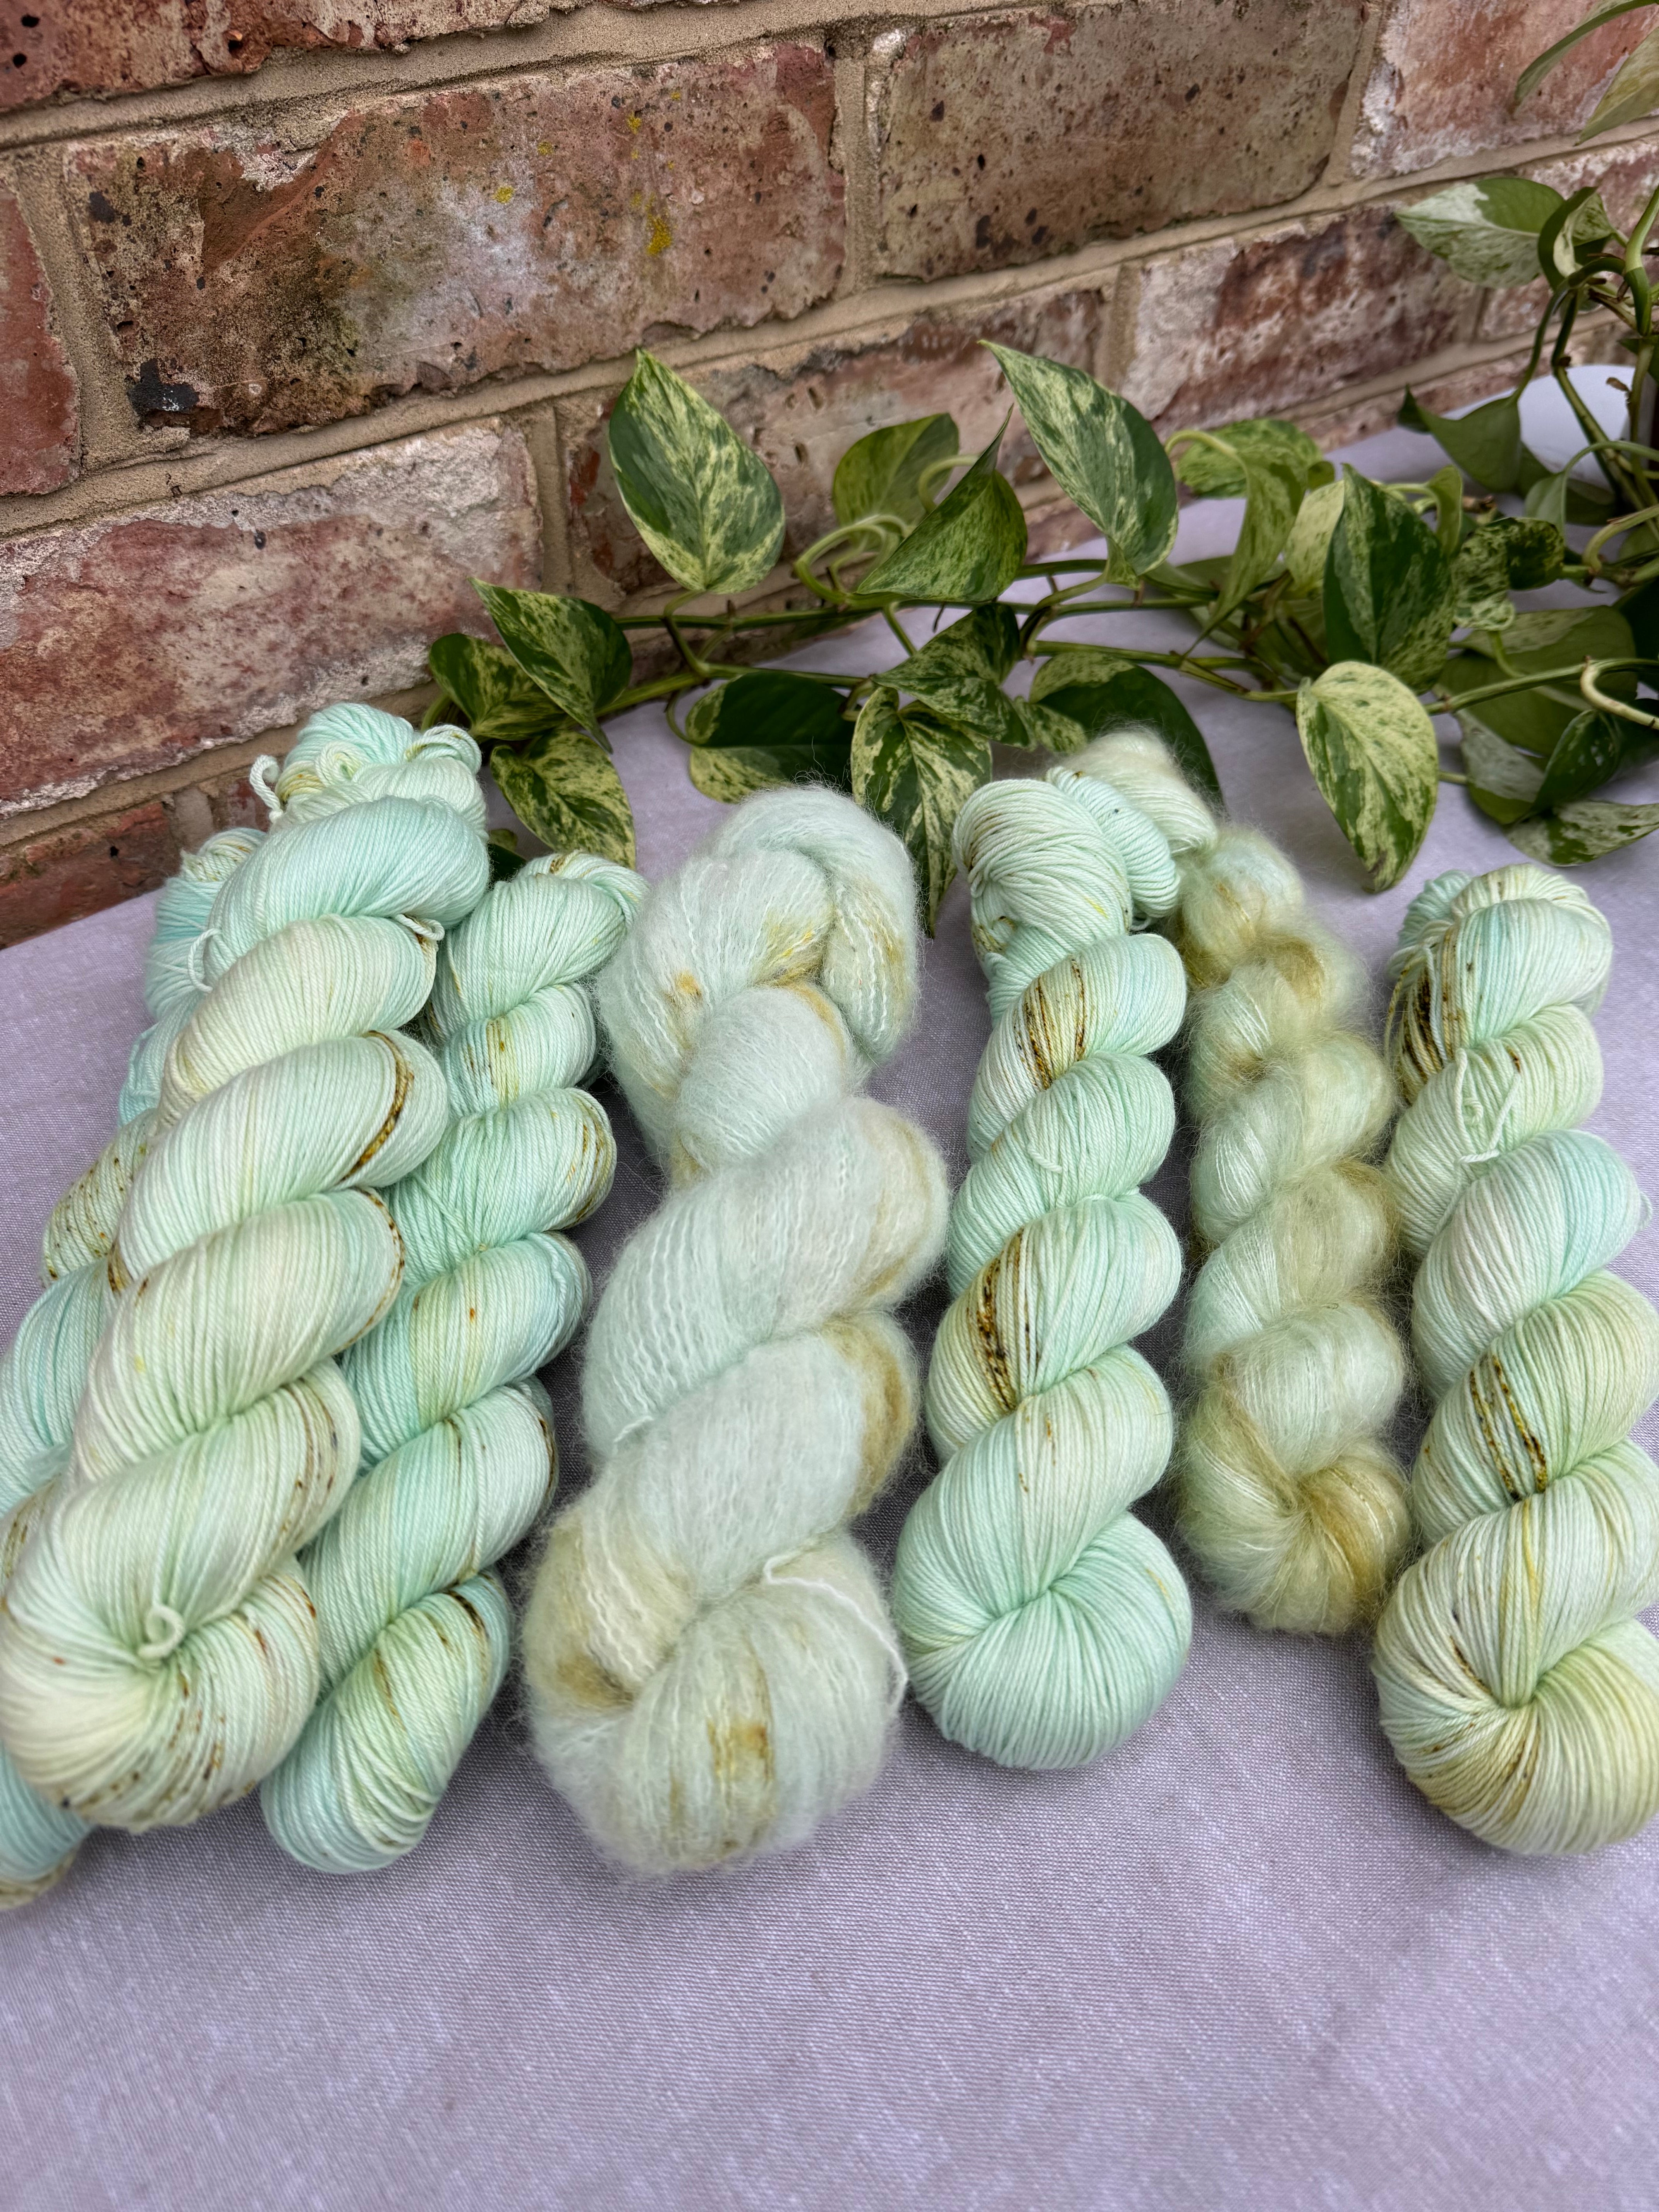 Colour of the Month Yarn Club